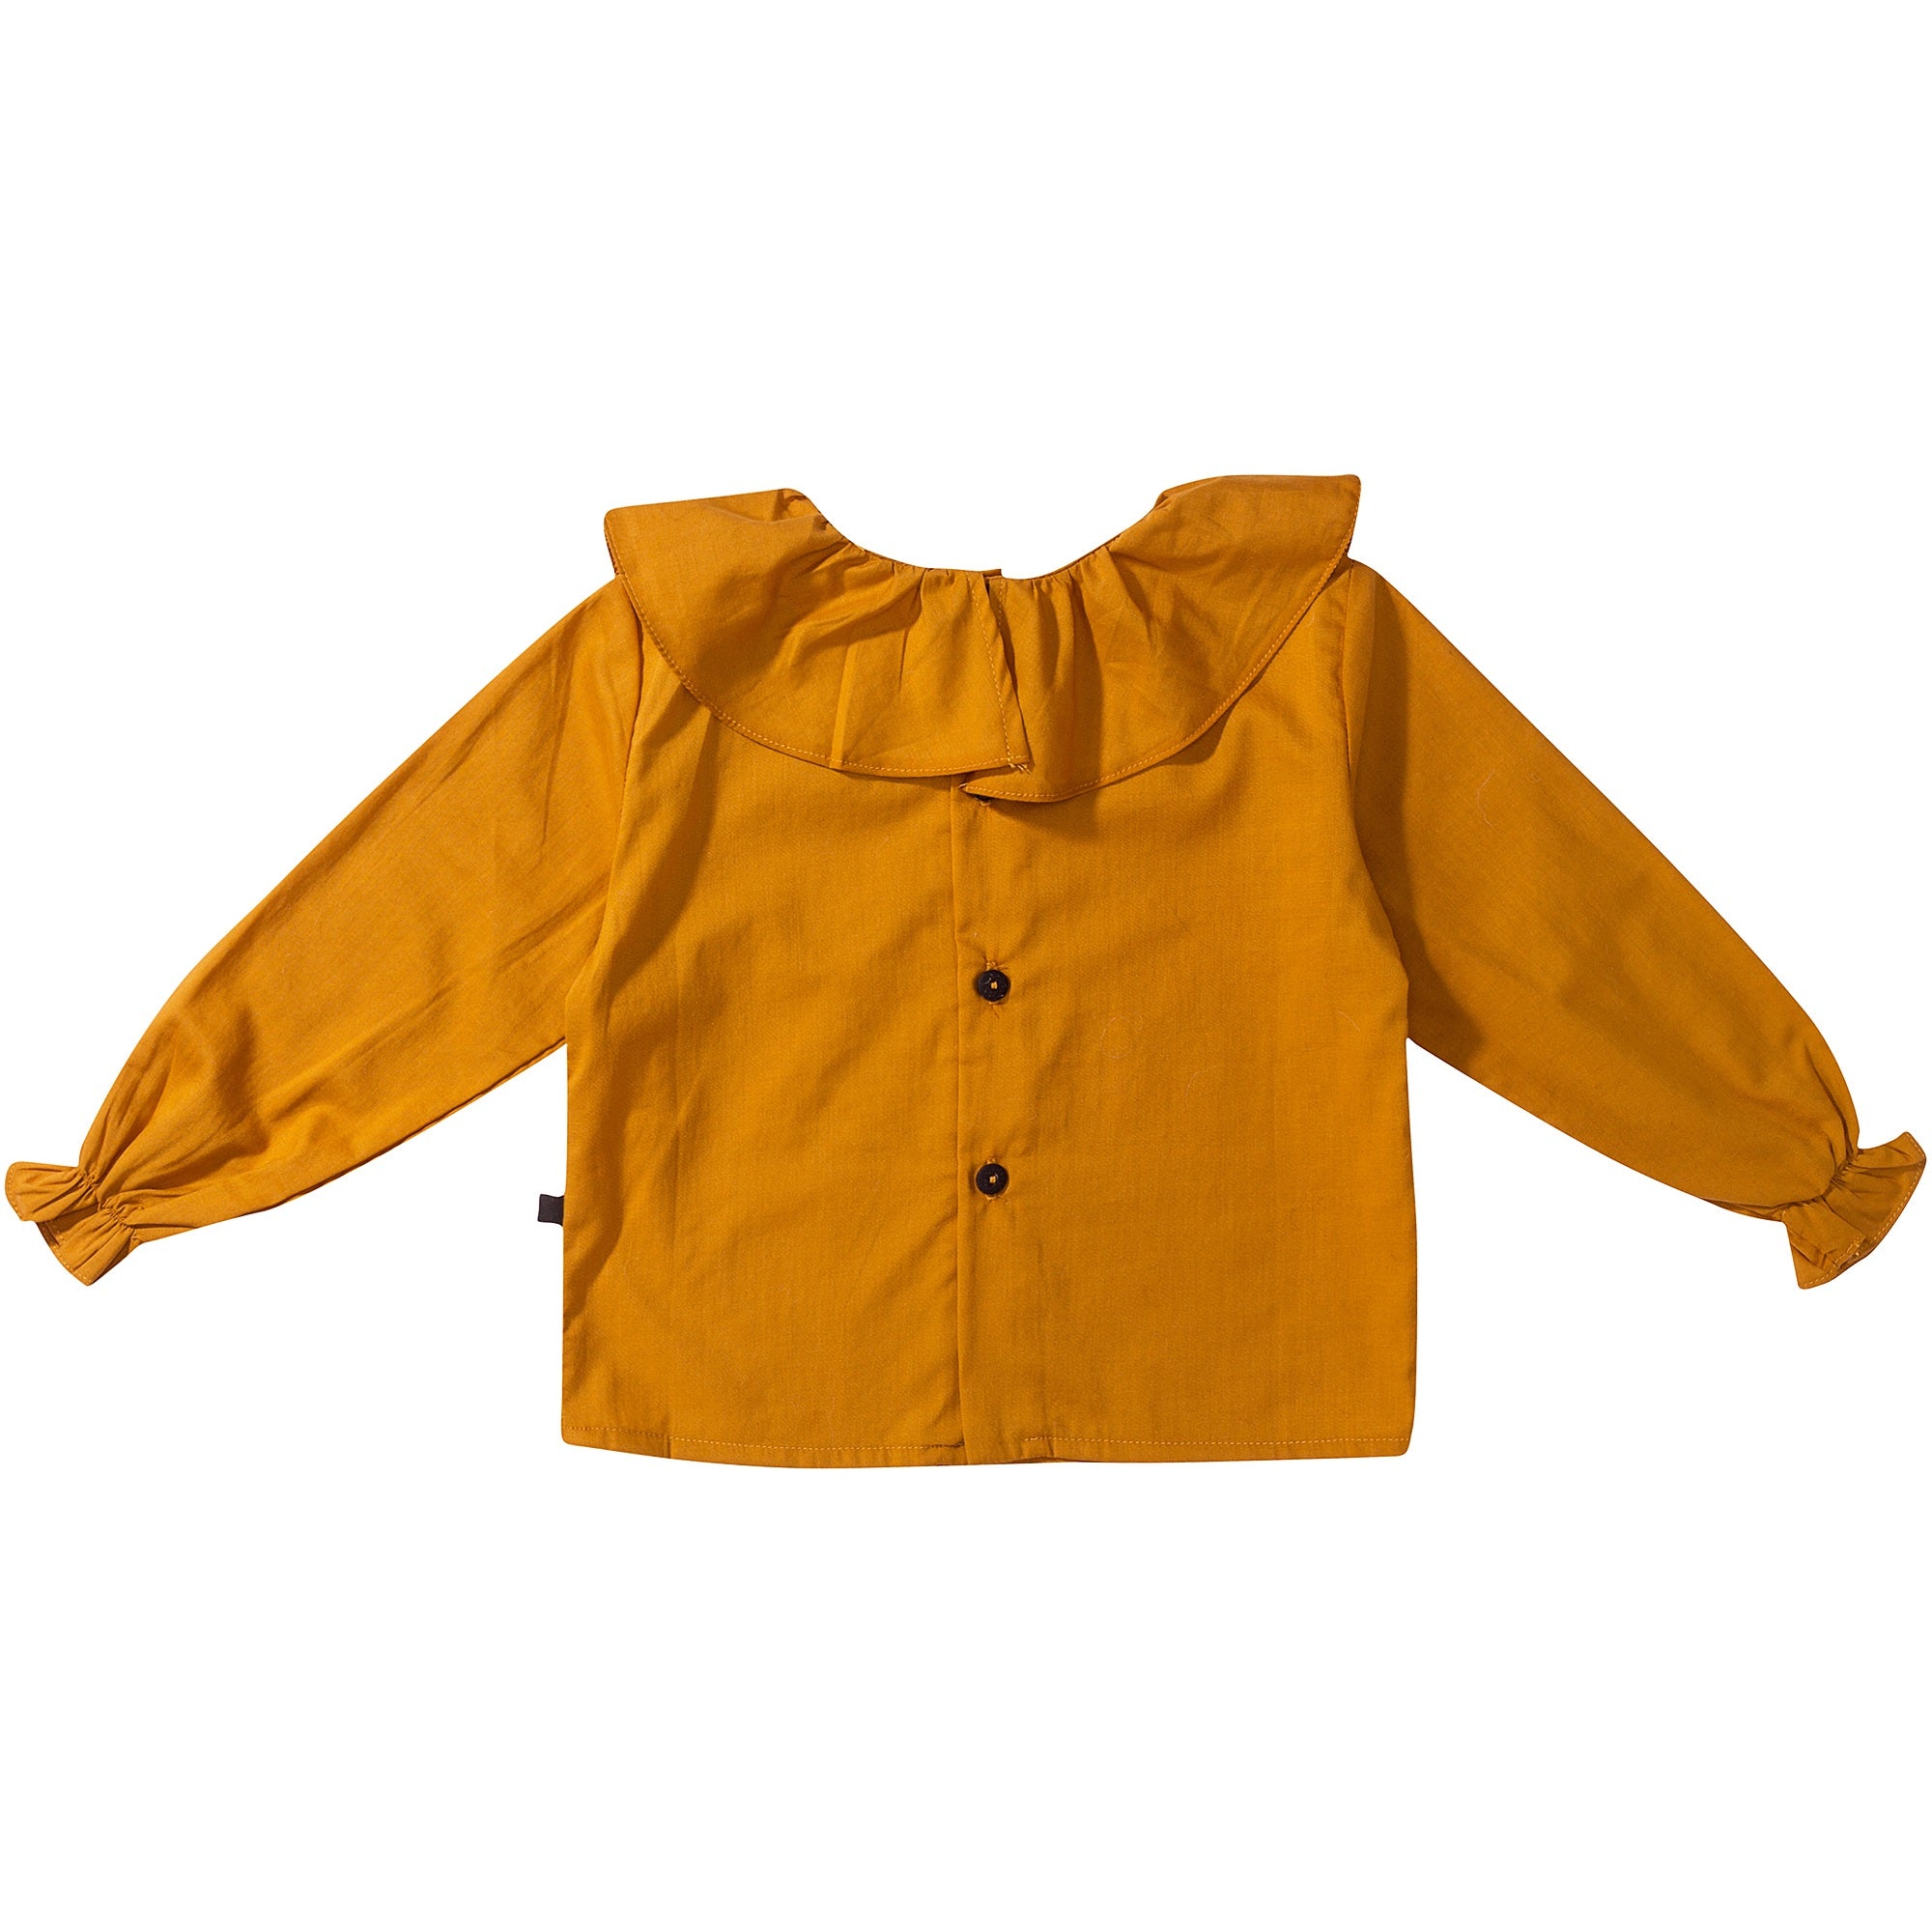 Girls Yellow Cotton Blouse With Collar